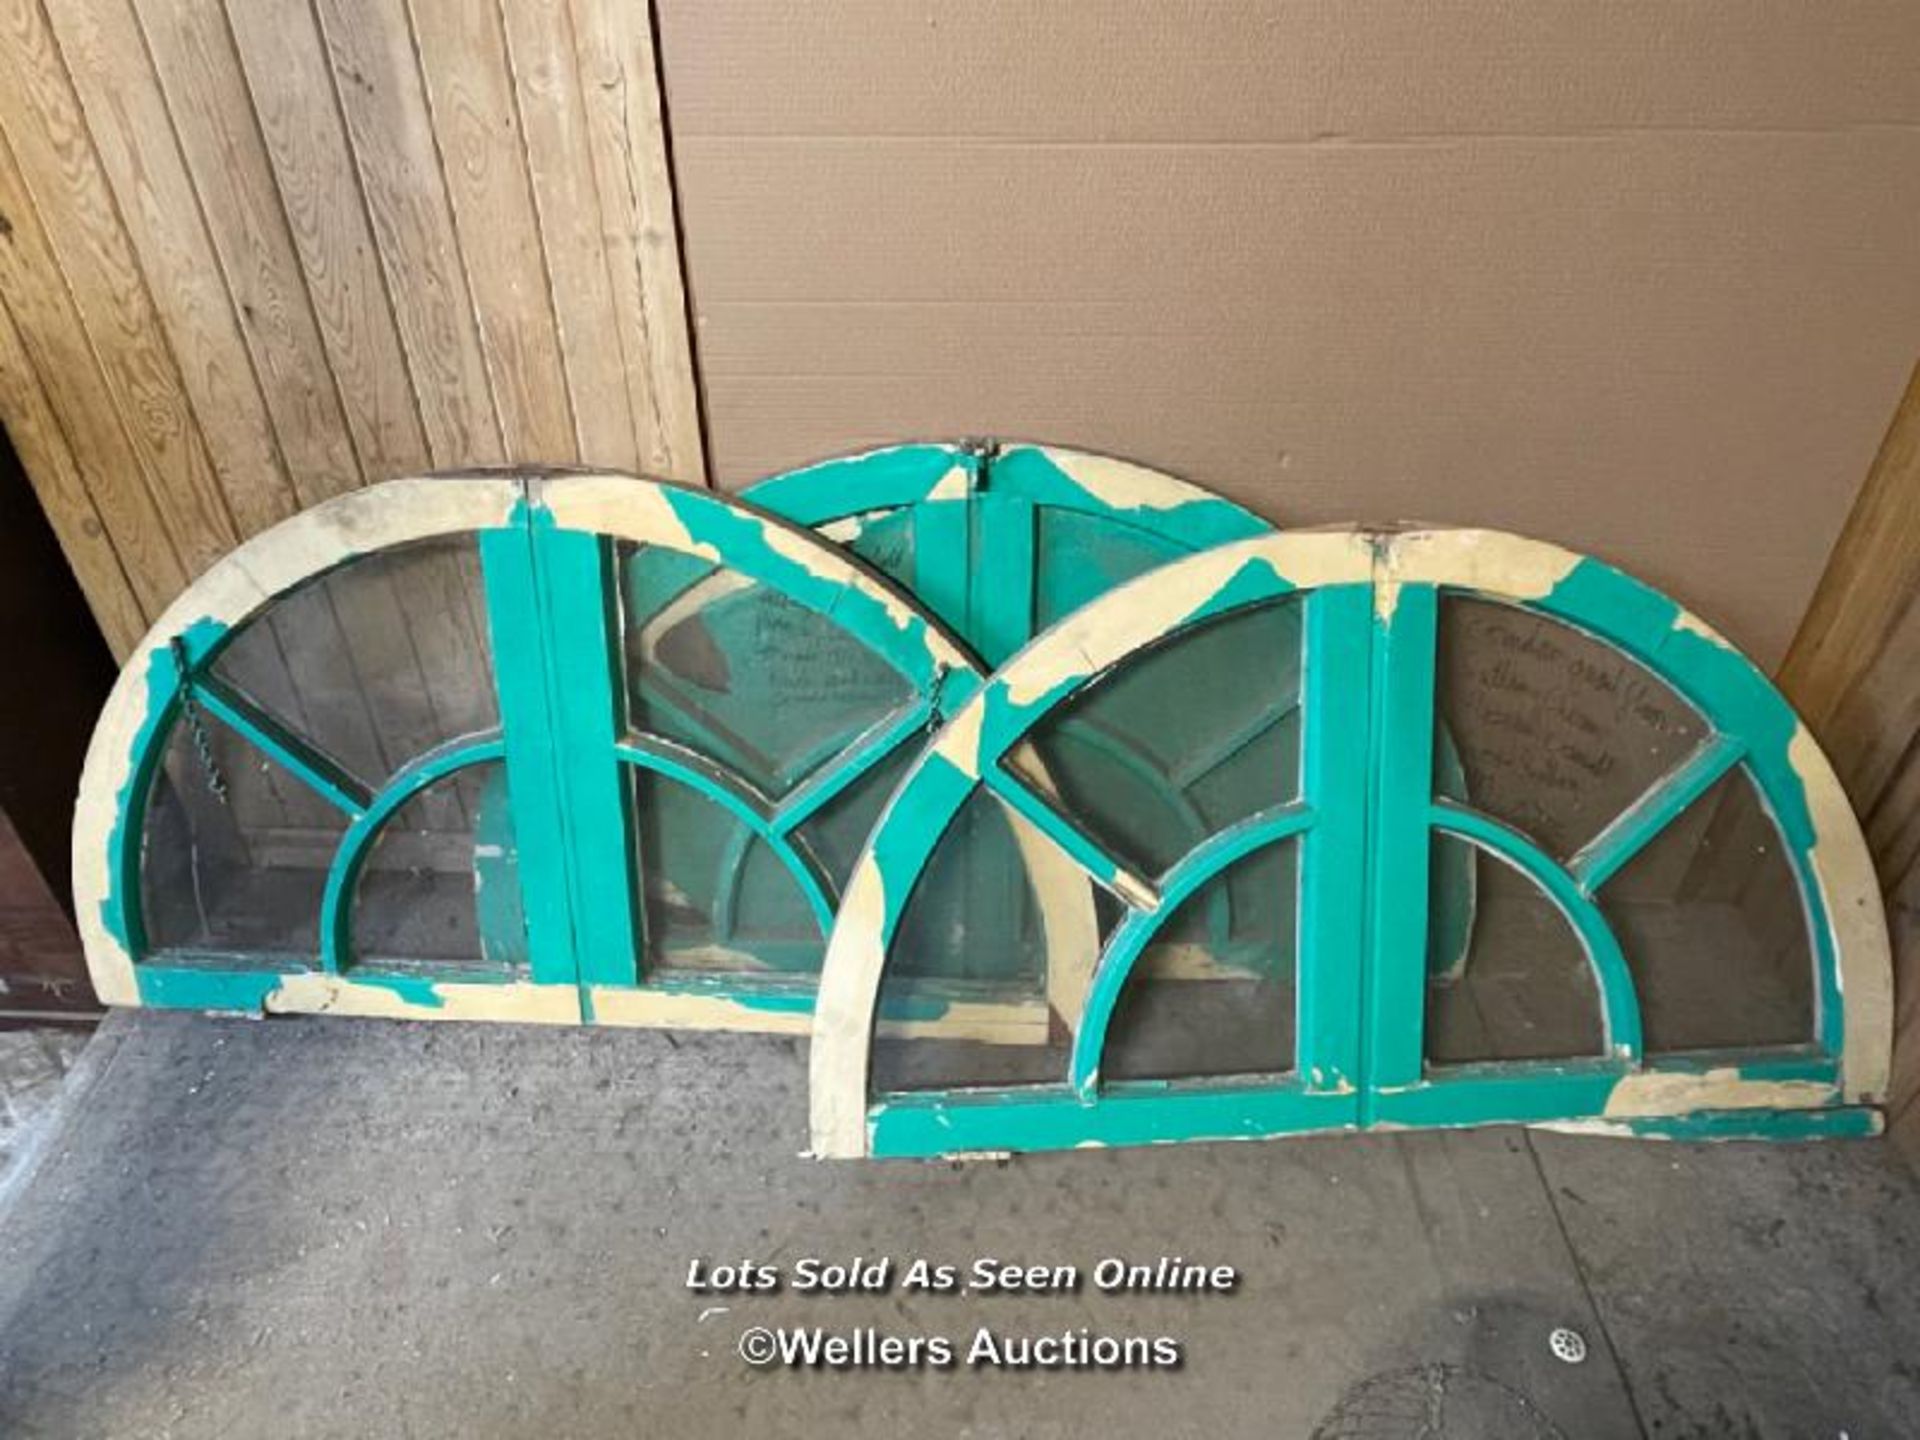 3 semicircular pine windows/overlights or for use as one large circular window or reuse as